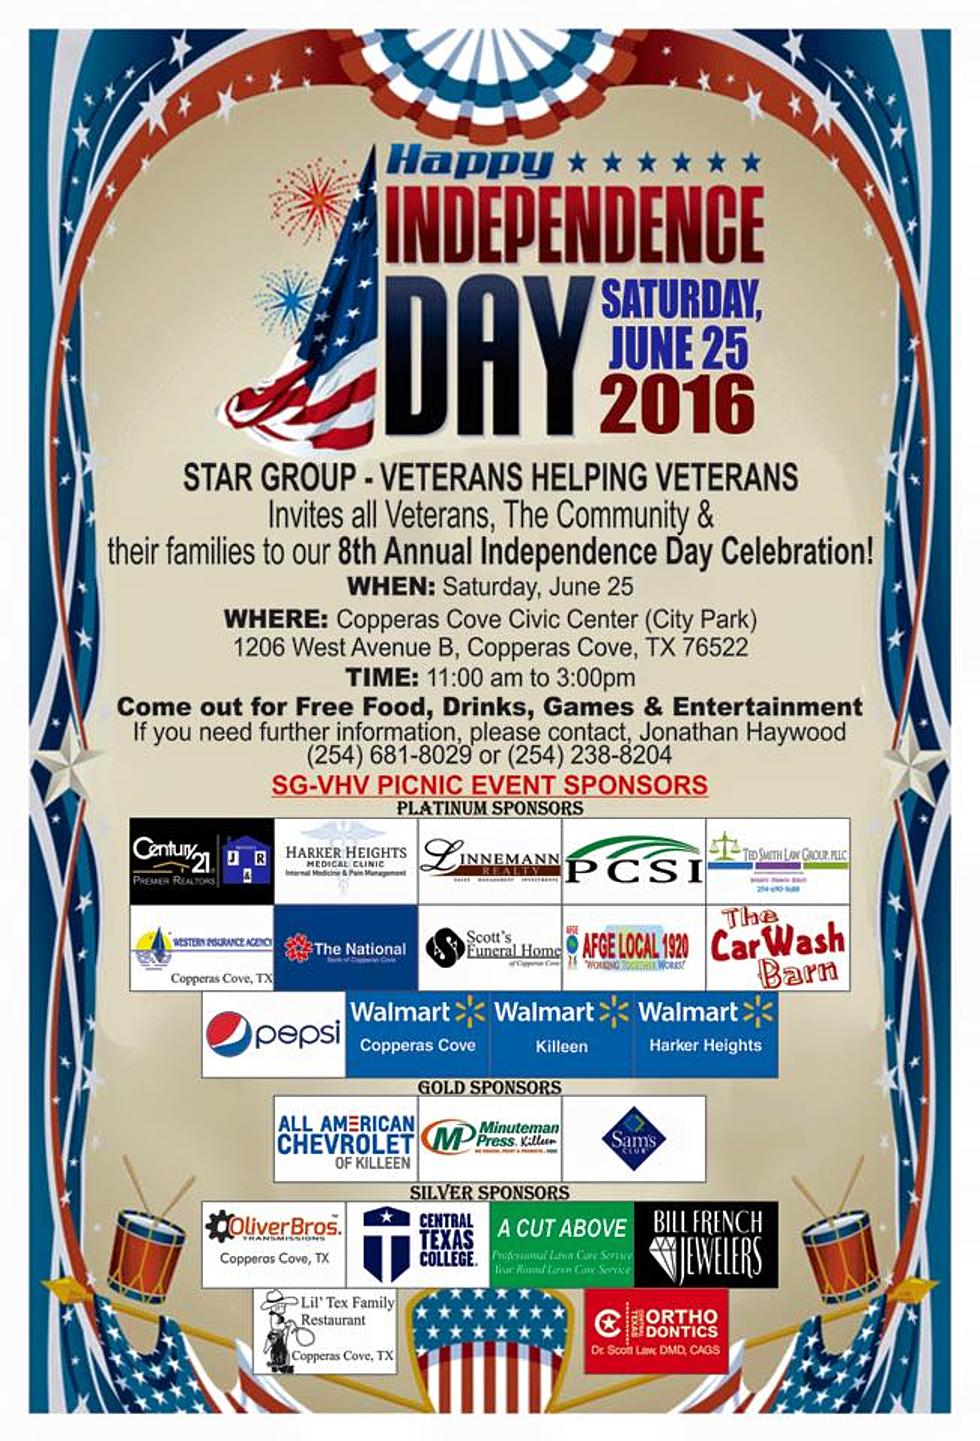 Star Group Veterans Helping Veterans Independence Day Celebration